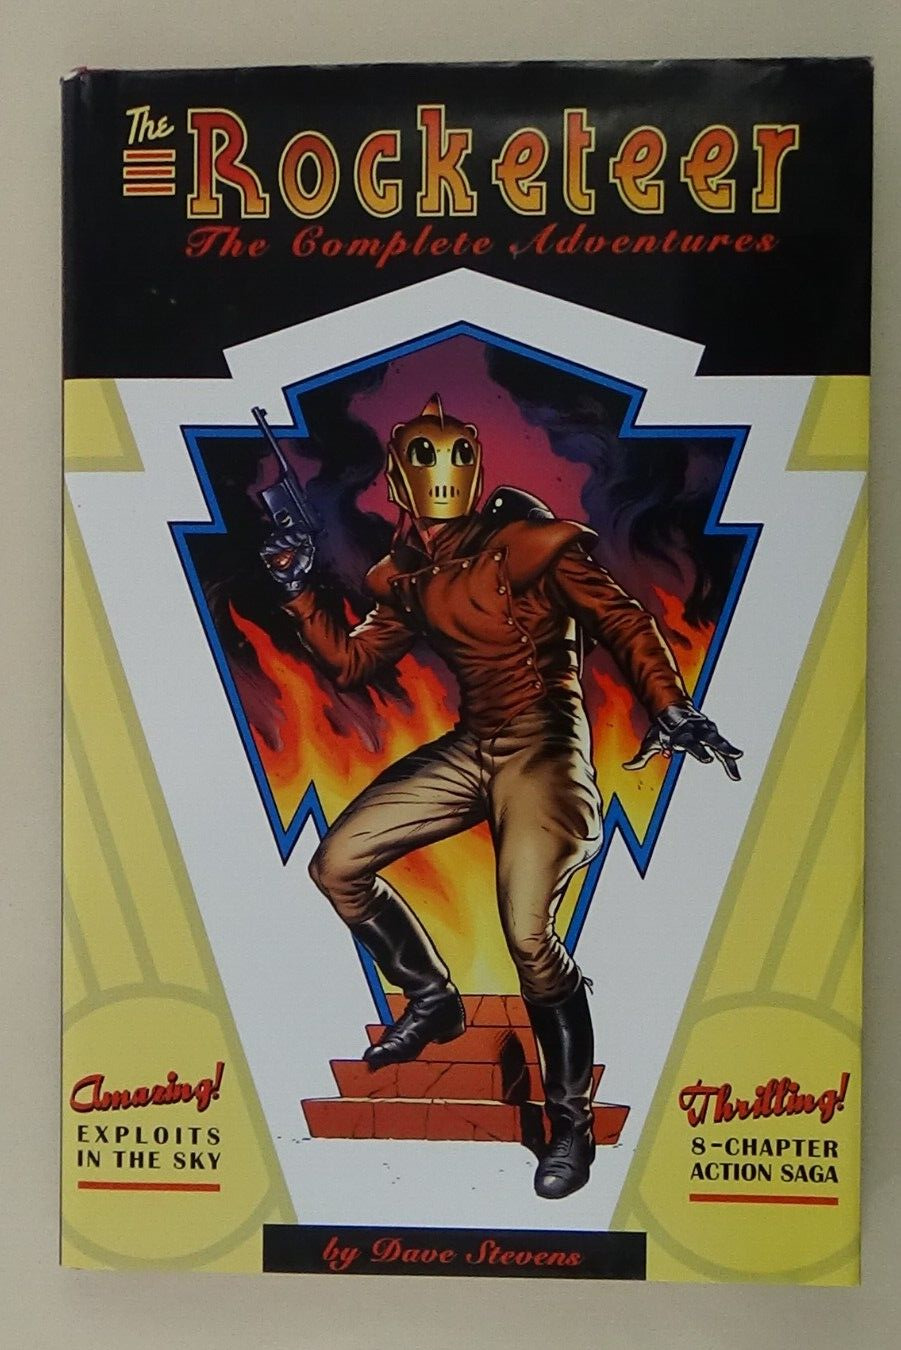 The Rocketeer: The Complete Adventures (IDW Publishing, 2011) Hardcover #07